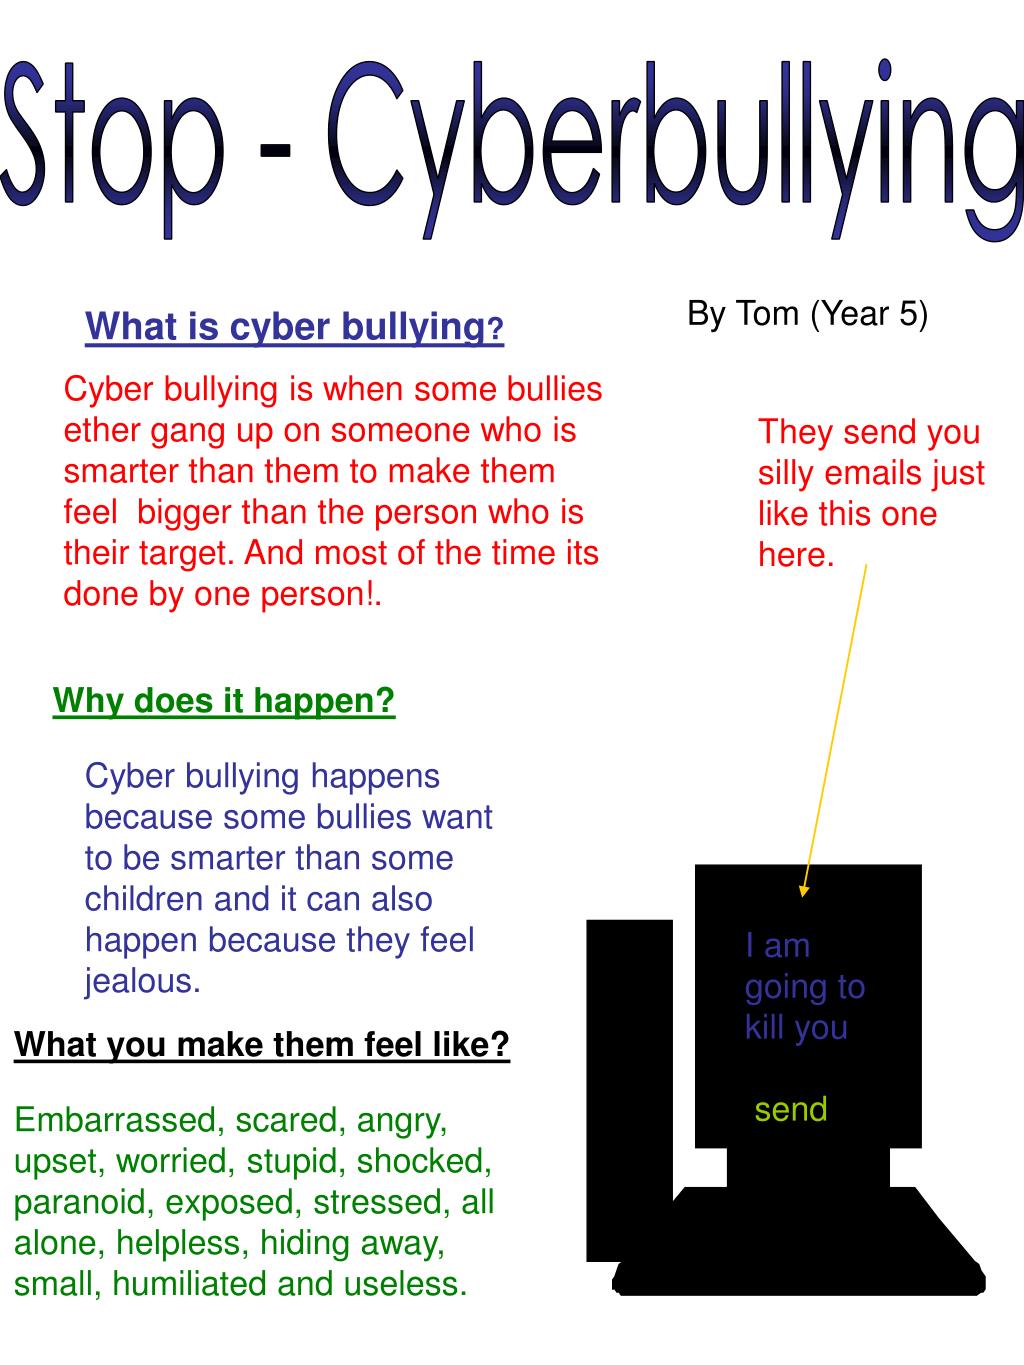 oral presentation about cyberbullying